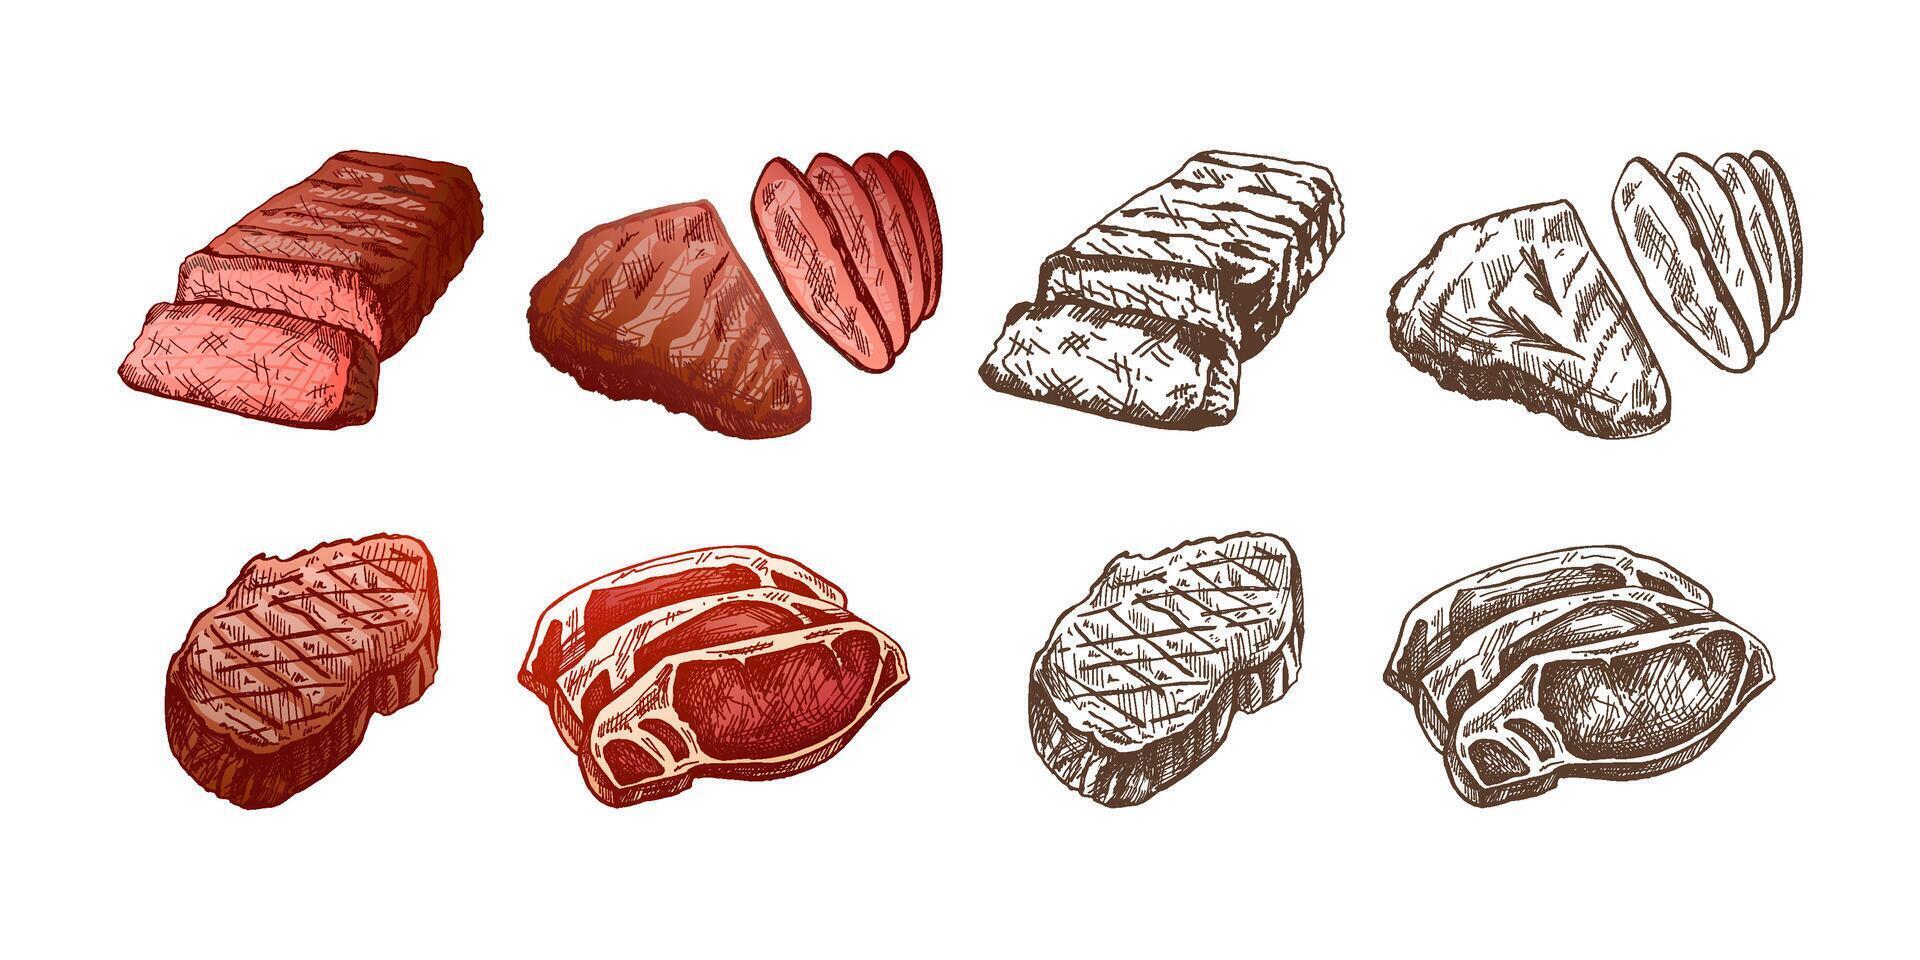 Organic food. Hand-drawn colored and monochrome vector sketches of grilled beef steaks, pieces of meat. Vintage illustration. Decorations for the menu. Engraved image.